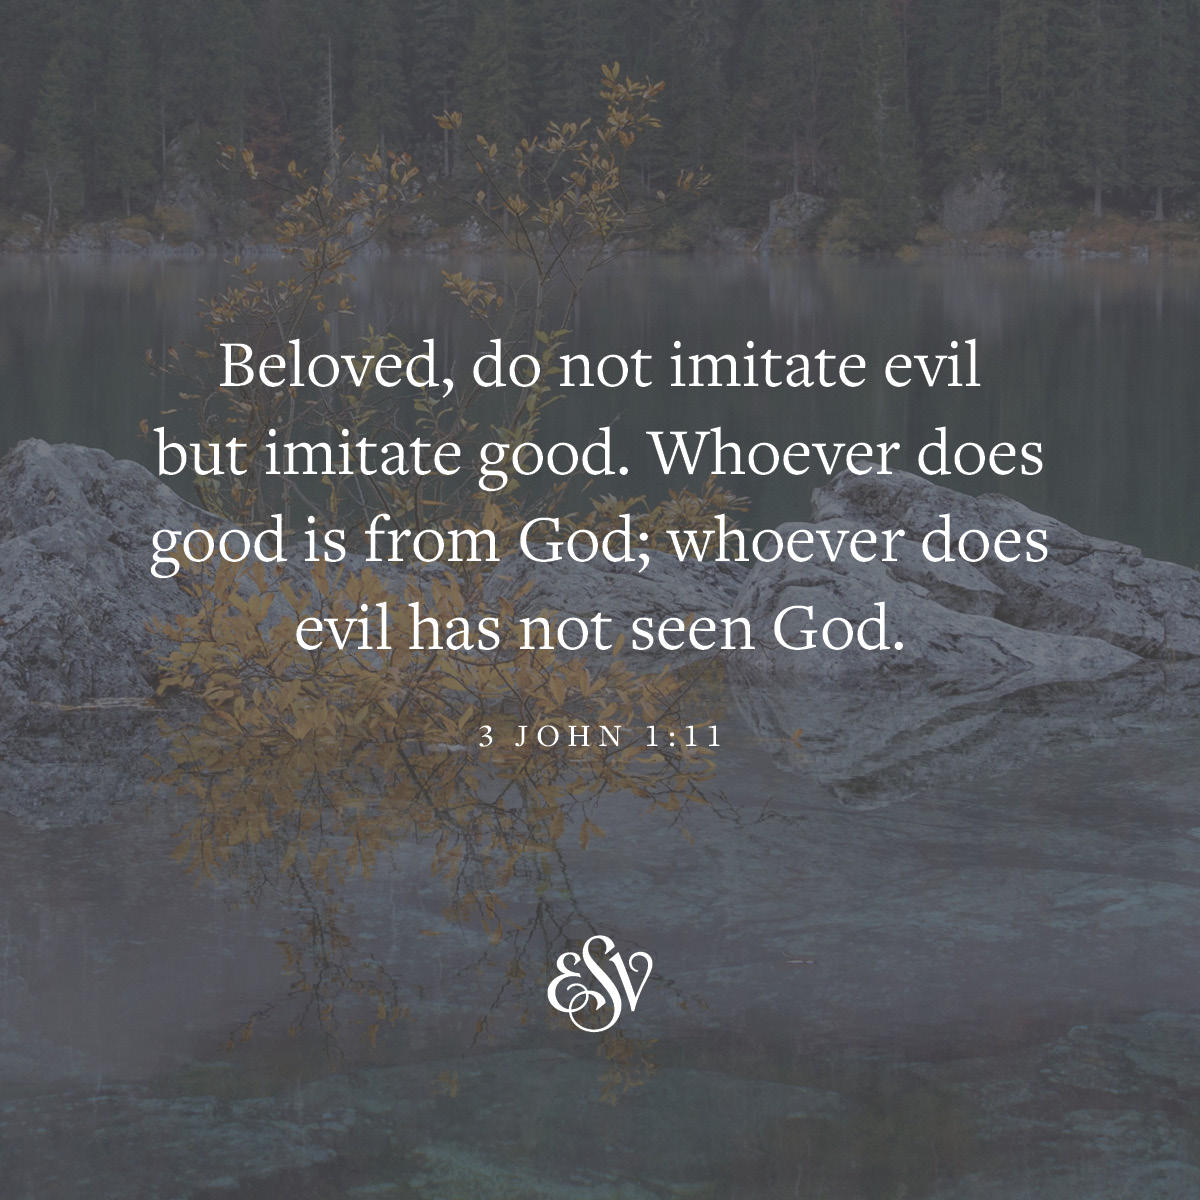 Beloved, do not imitate evil but imitate good. Whoever does good is from God; whoever does evil has not seen God. —3 John 1:11 ESV.org 

#Verseoftheday #ESV #Scripturememoryverse #Bible